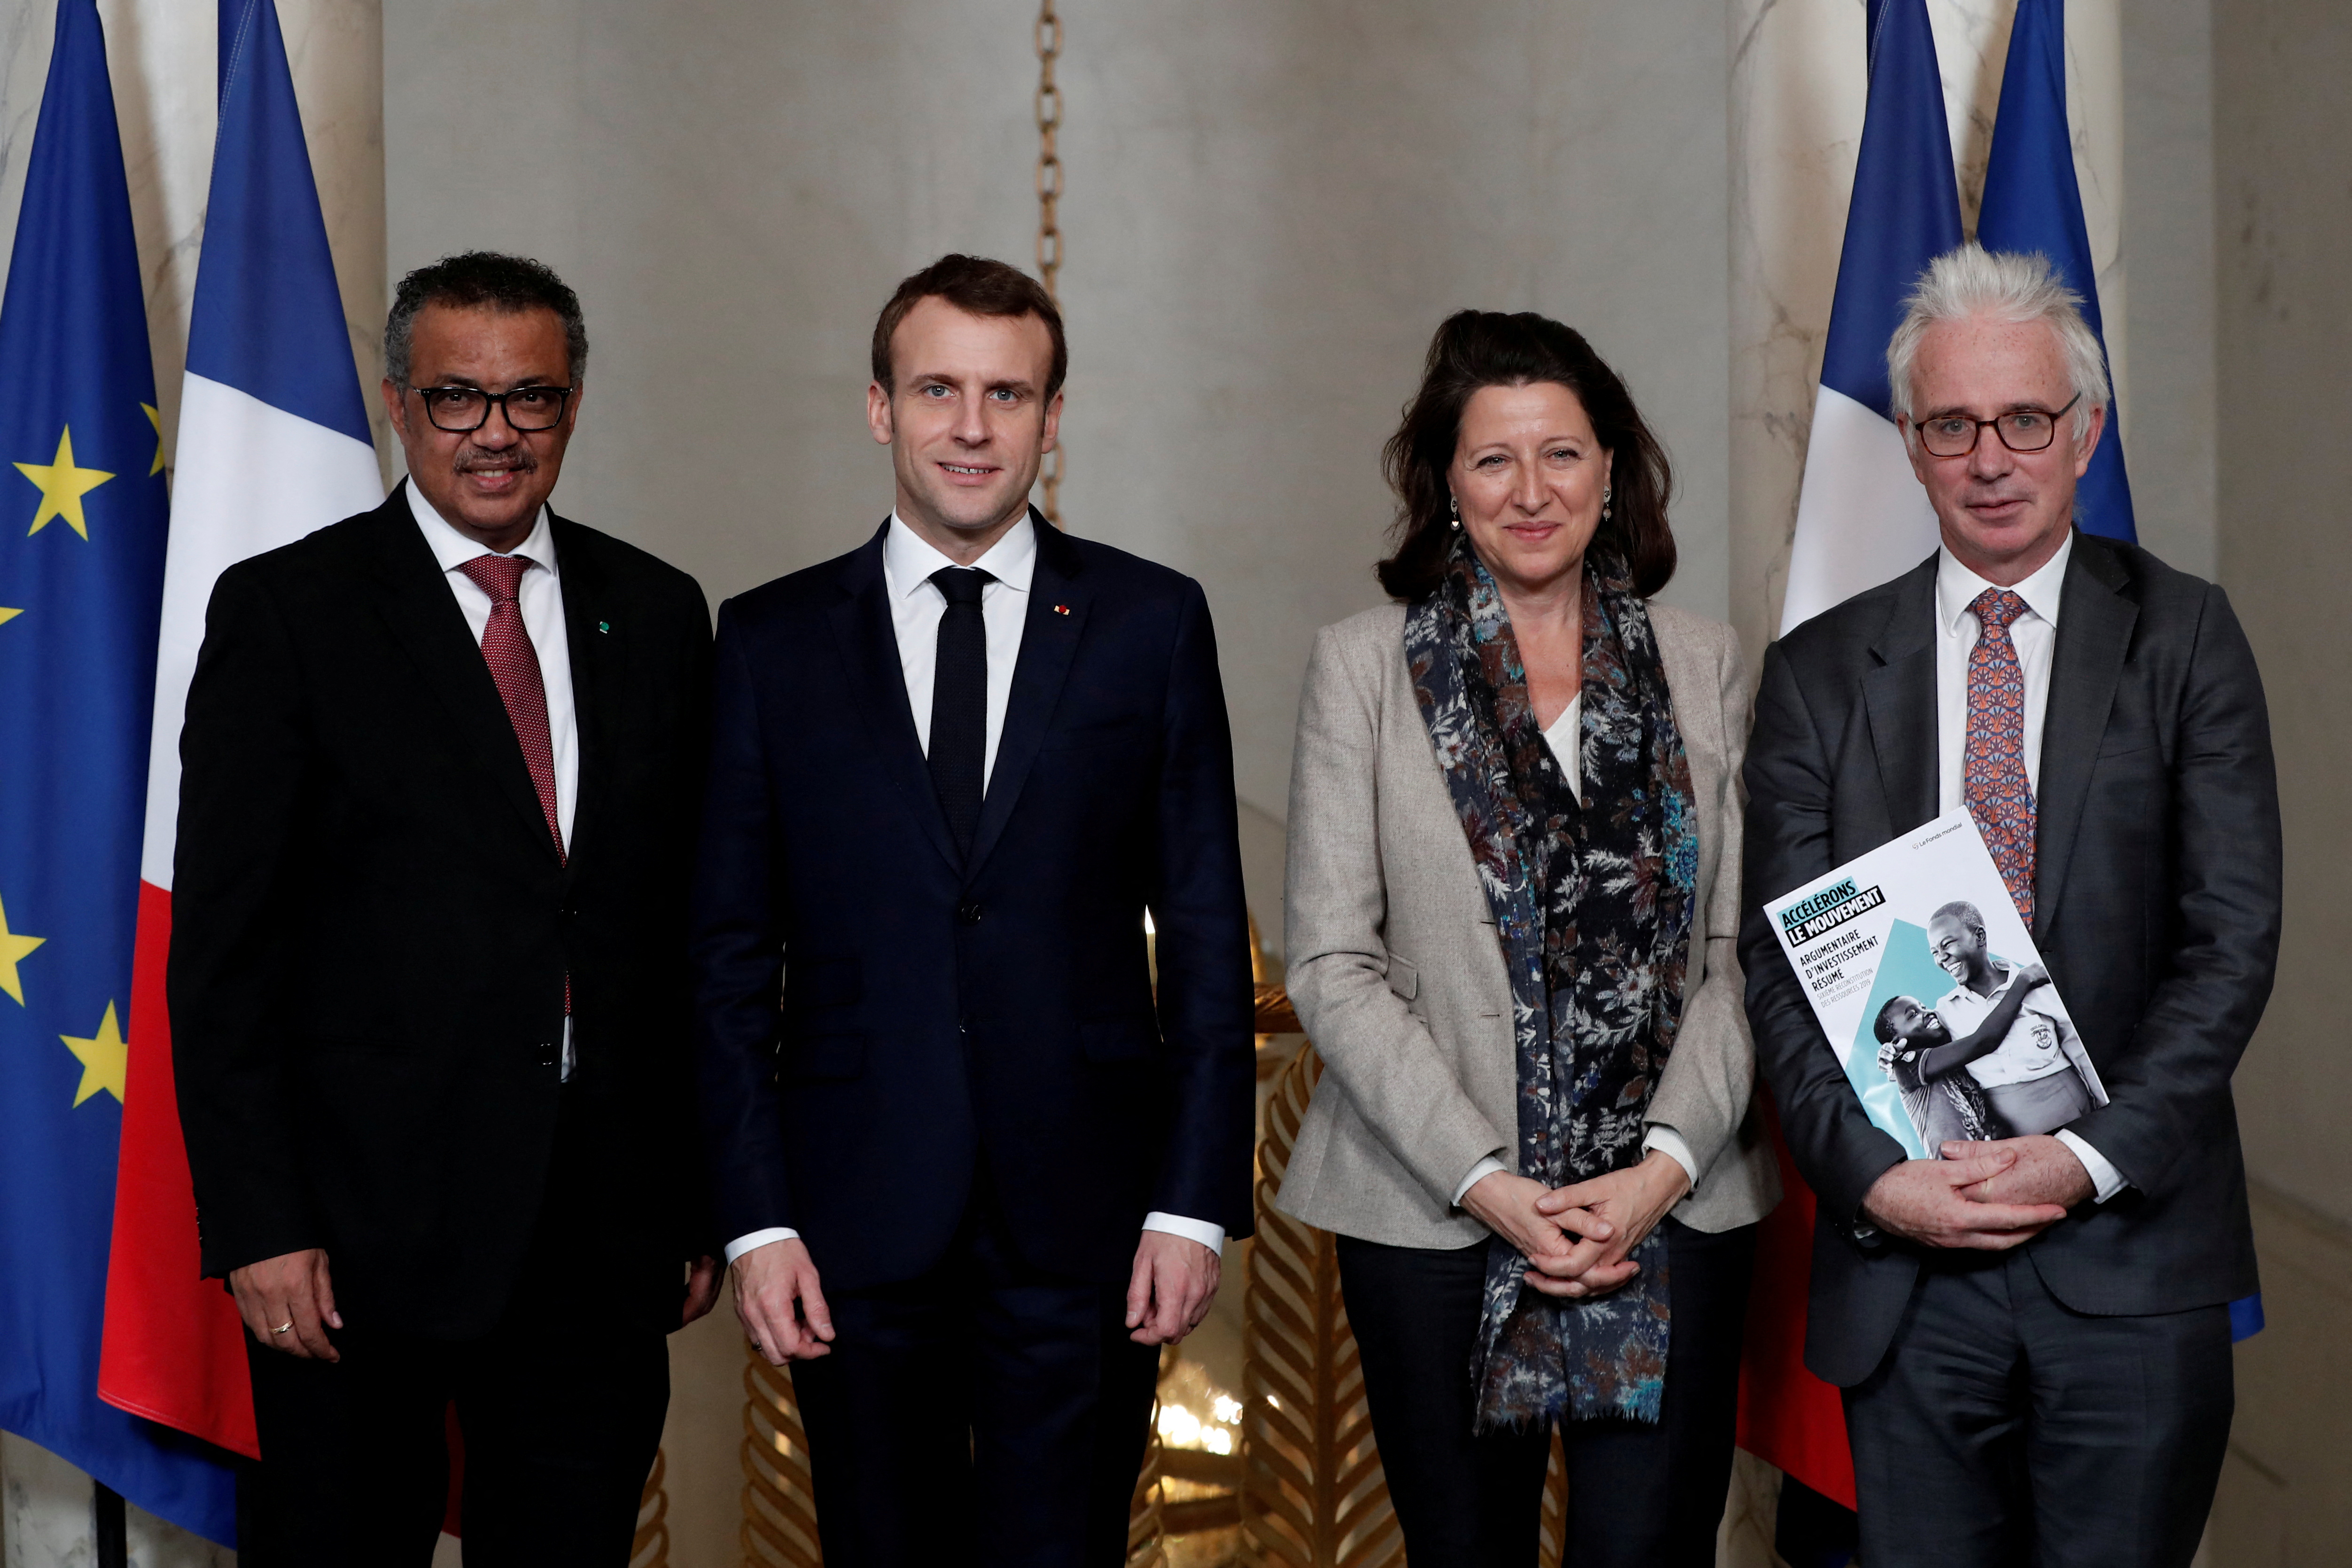 French President Emmanuel Macron, Tedros Adhanom Ghebreyesus, Director-General of World Health Organization, Agnes Buzyn, French Minister for Solidarity and Health, and Peter Alexander Sands pose at the Elysee Palace in Paris